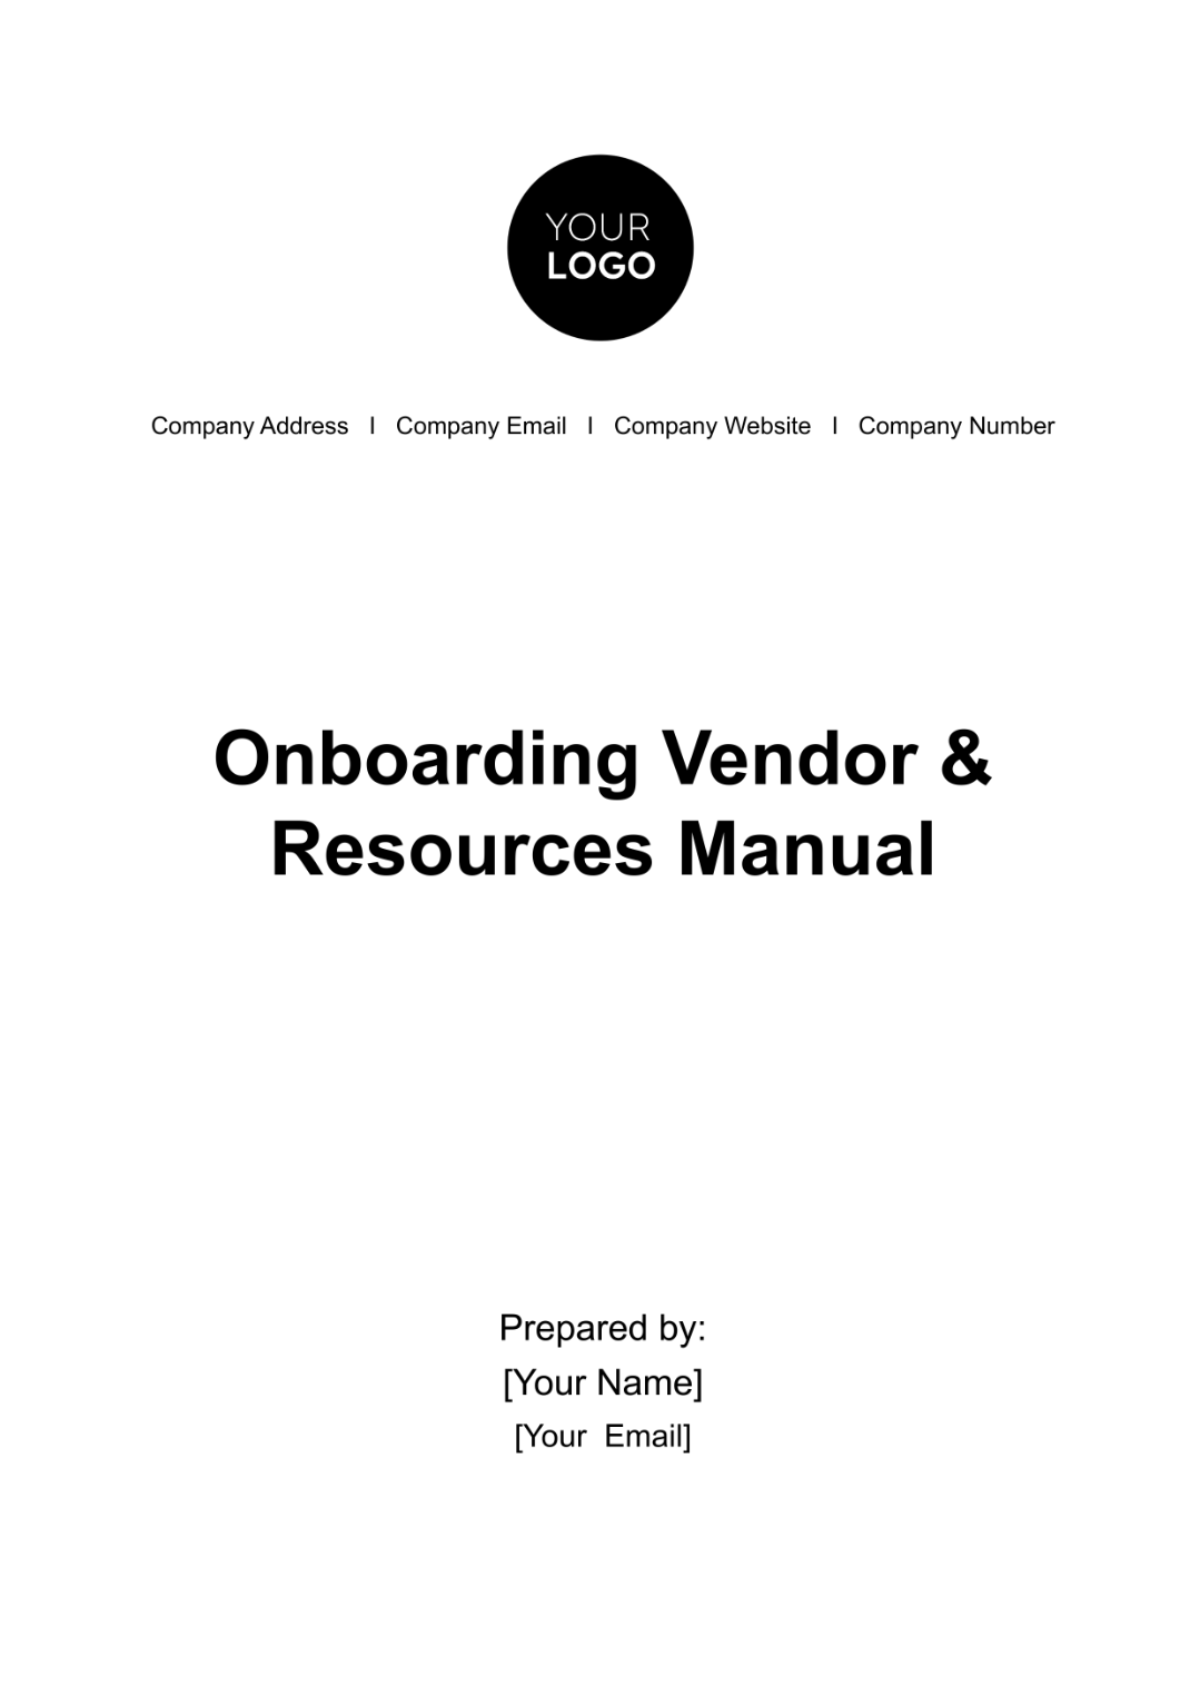 Free Onboarding Vendor & Resources Manual HR Template